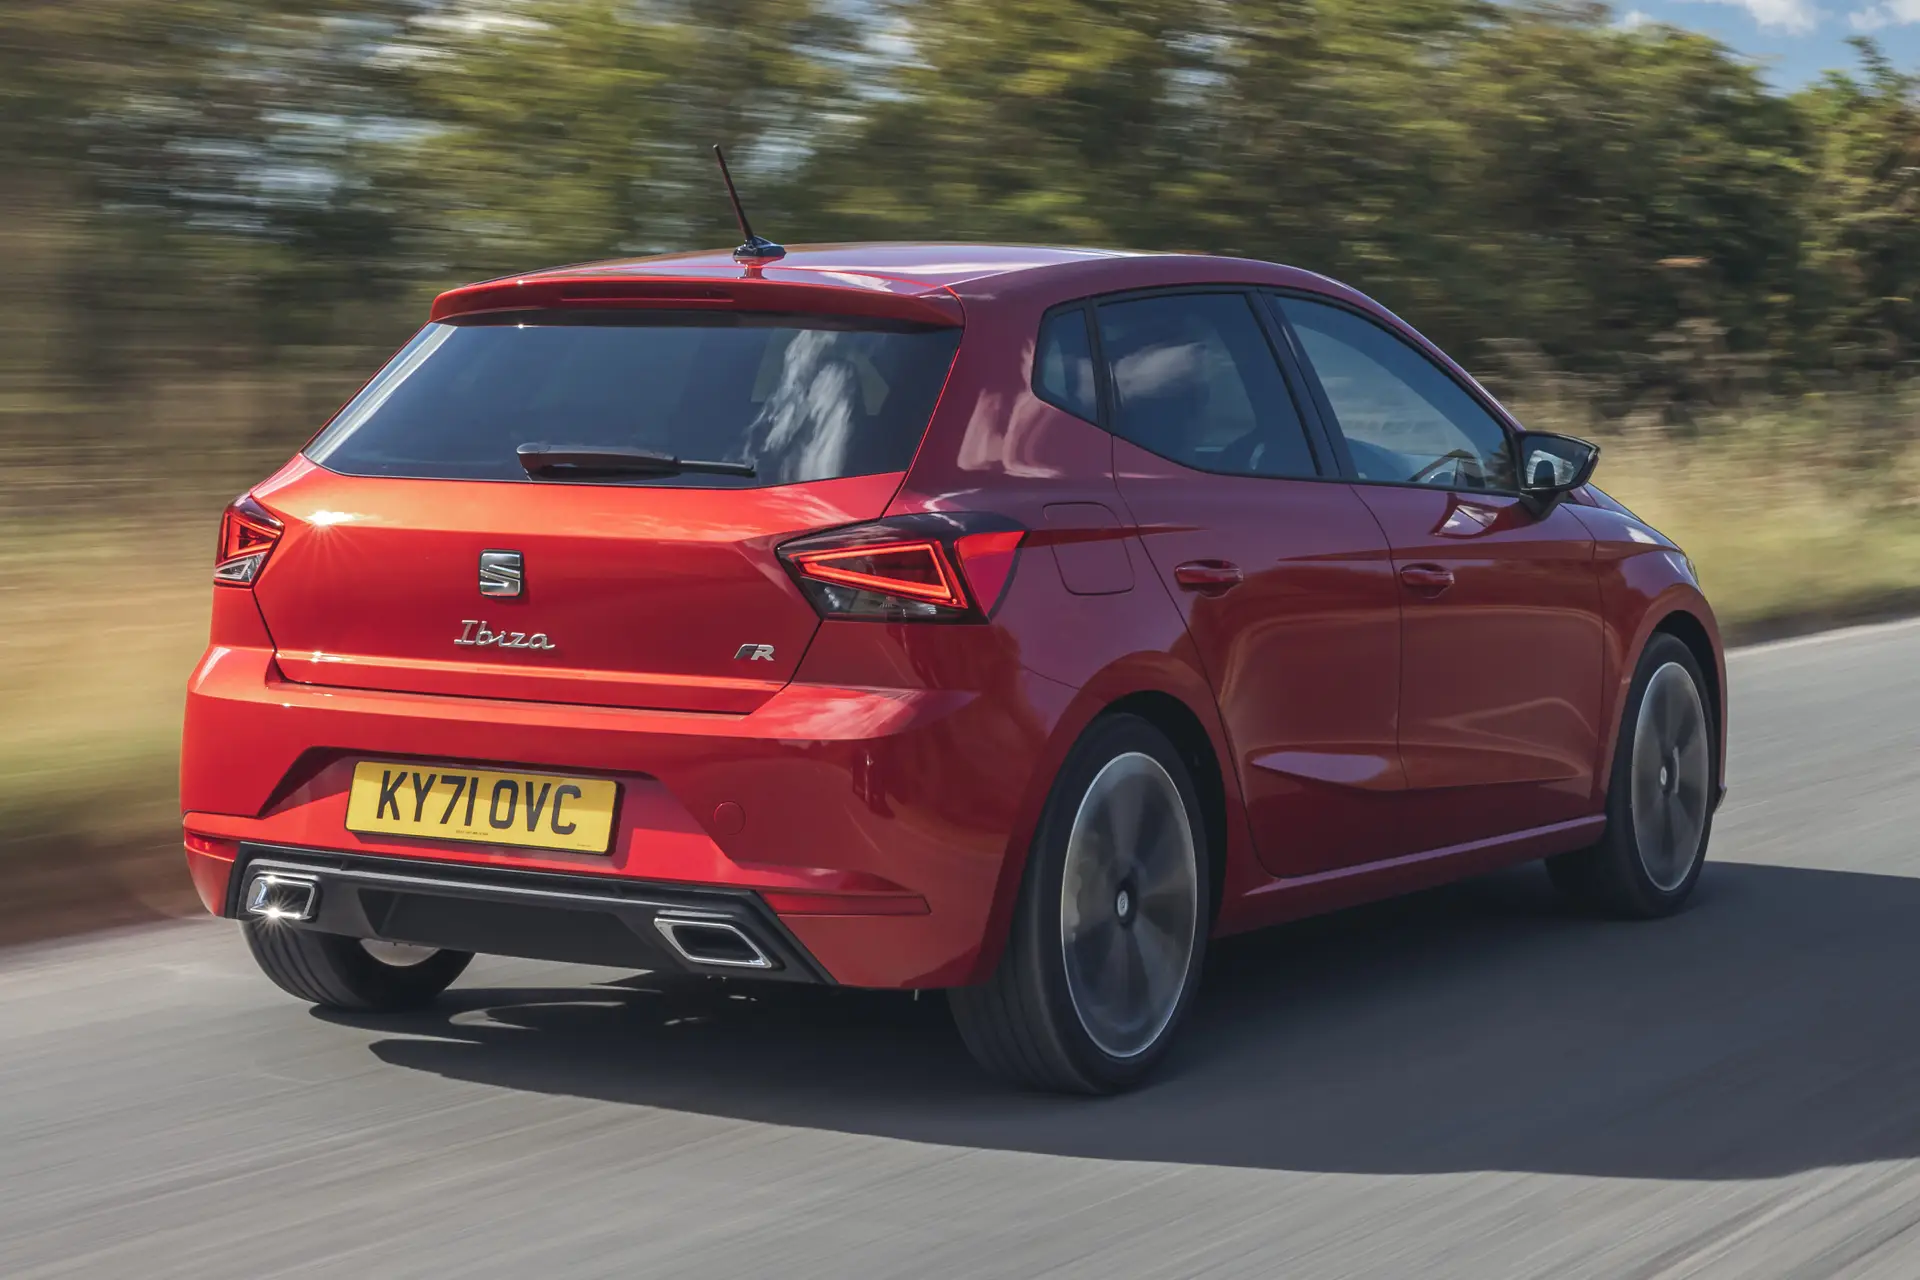 SEAT Ibiza 2022 models and trims, prices and specifications in